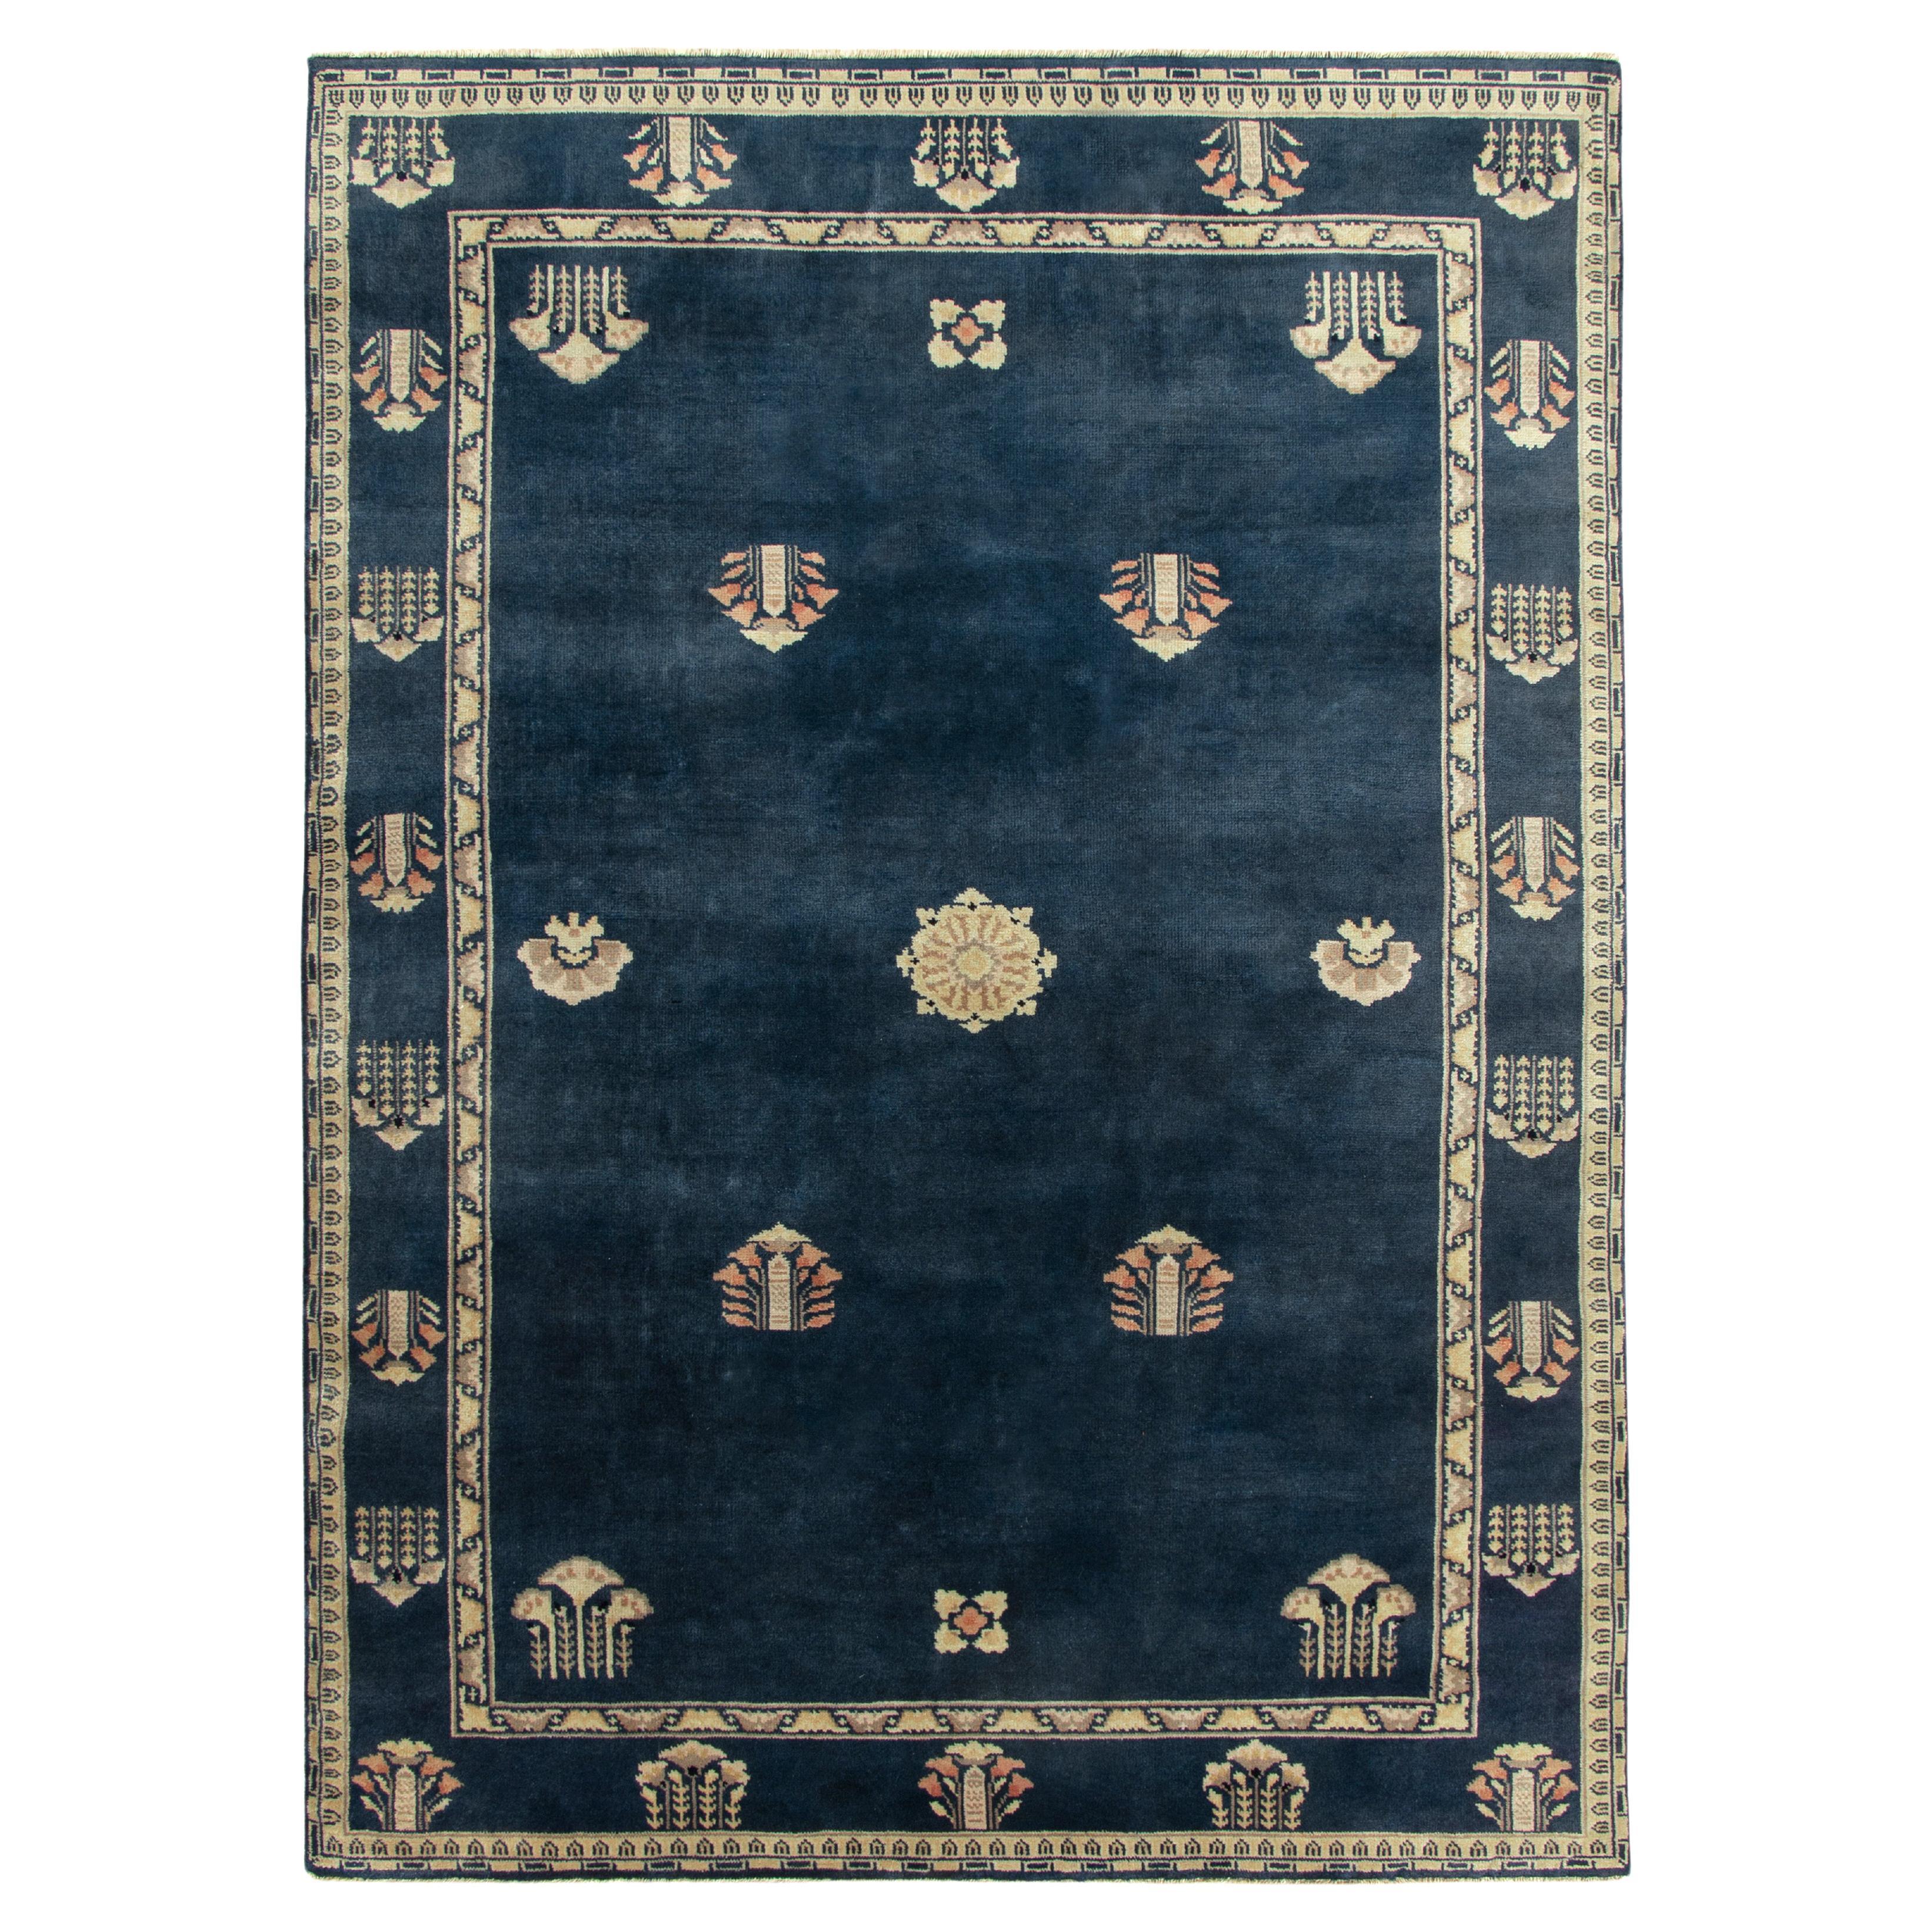 Vintage Chinese Deco Style Rug in Blue & Grey Floral Patterns by Rug & Kilim For Sale